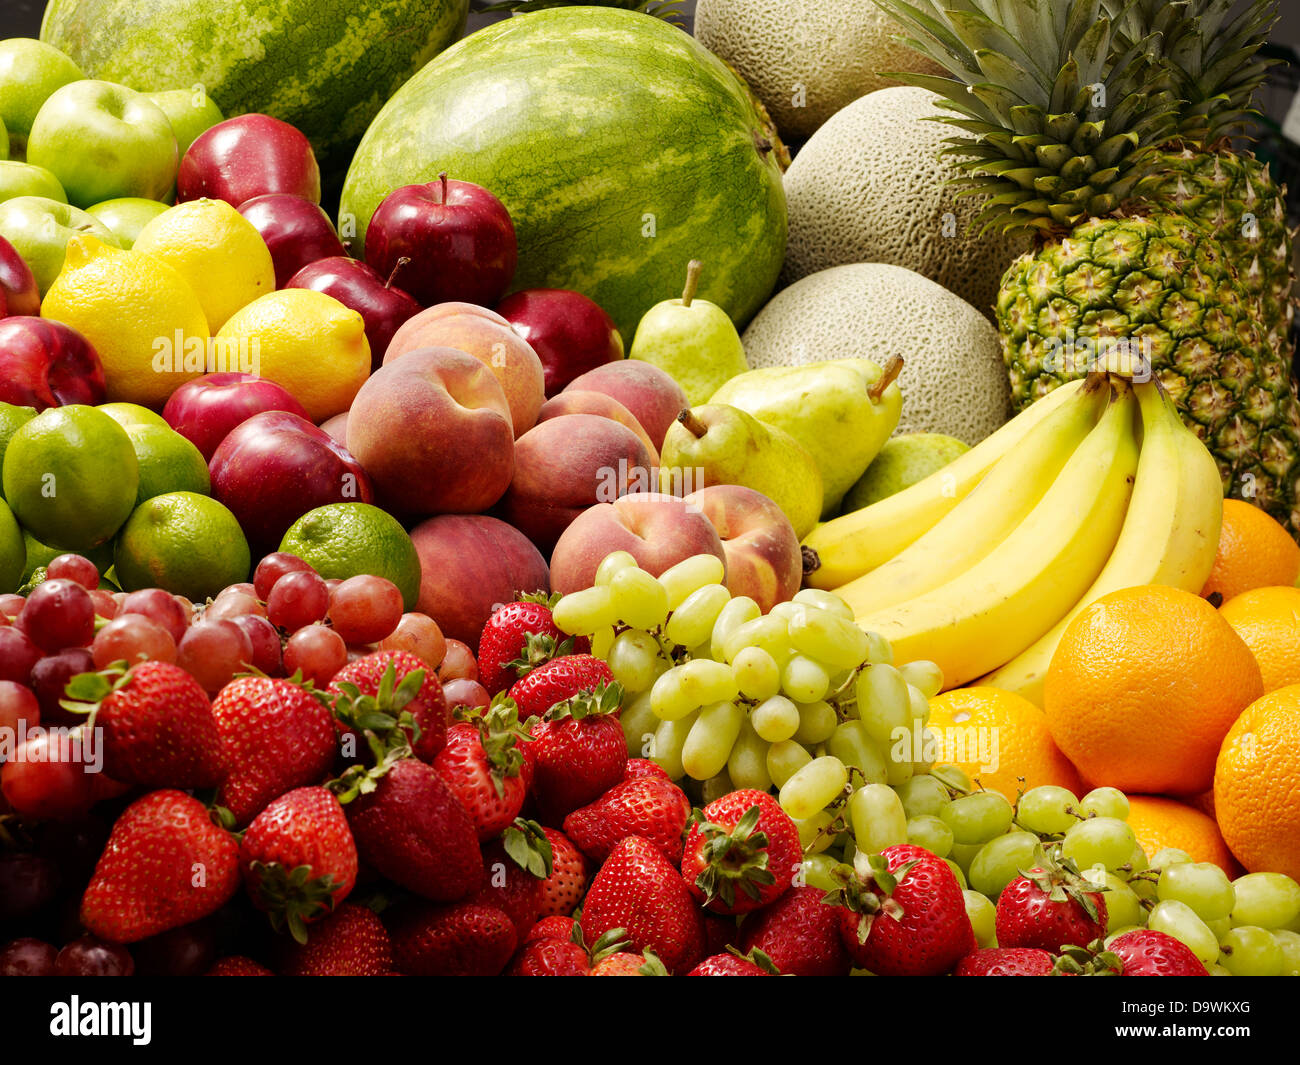 fruit stand Stock Photo